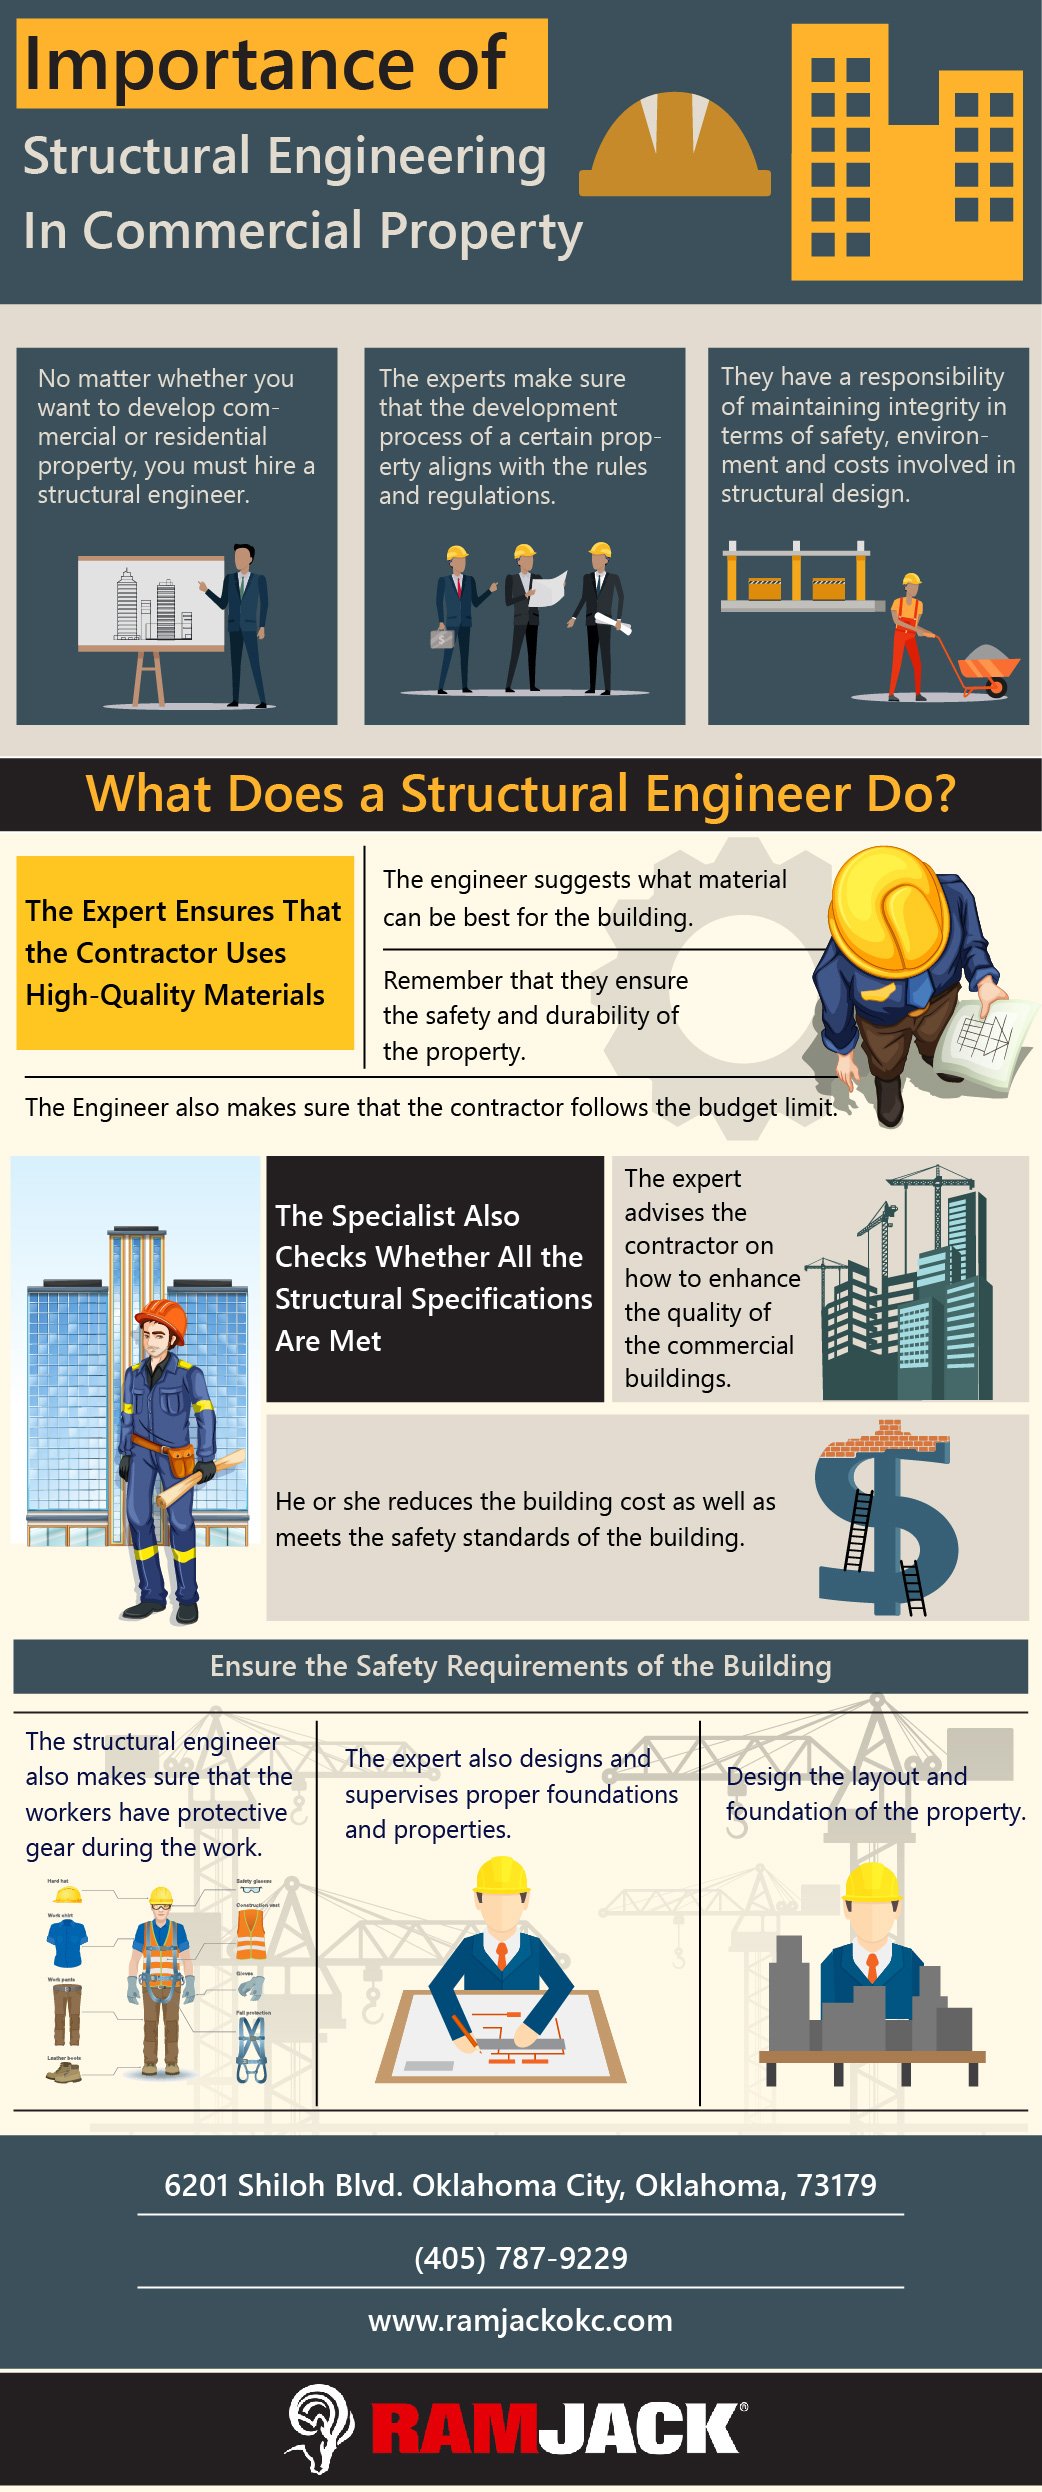 Structural Engineer